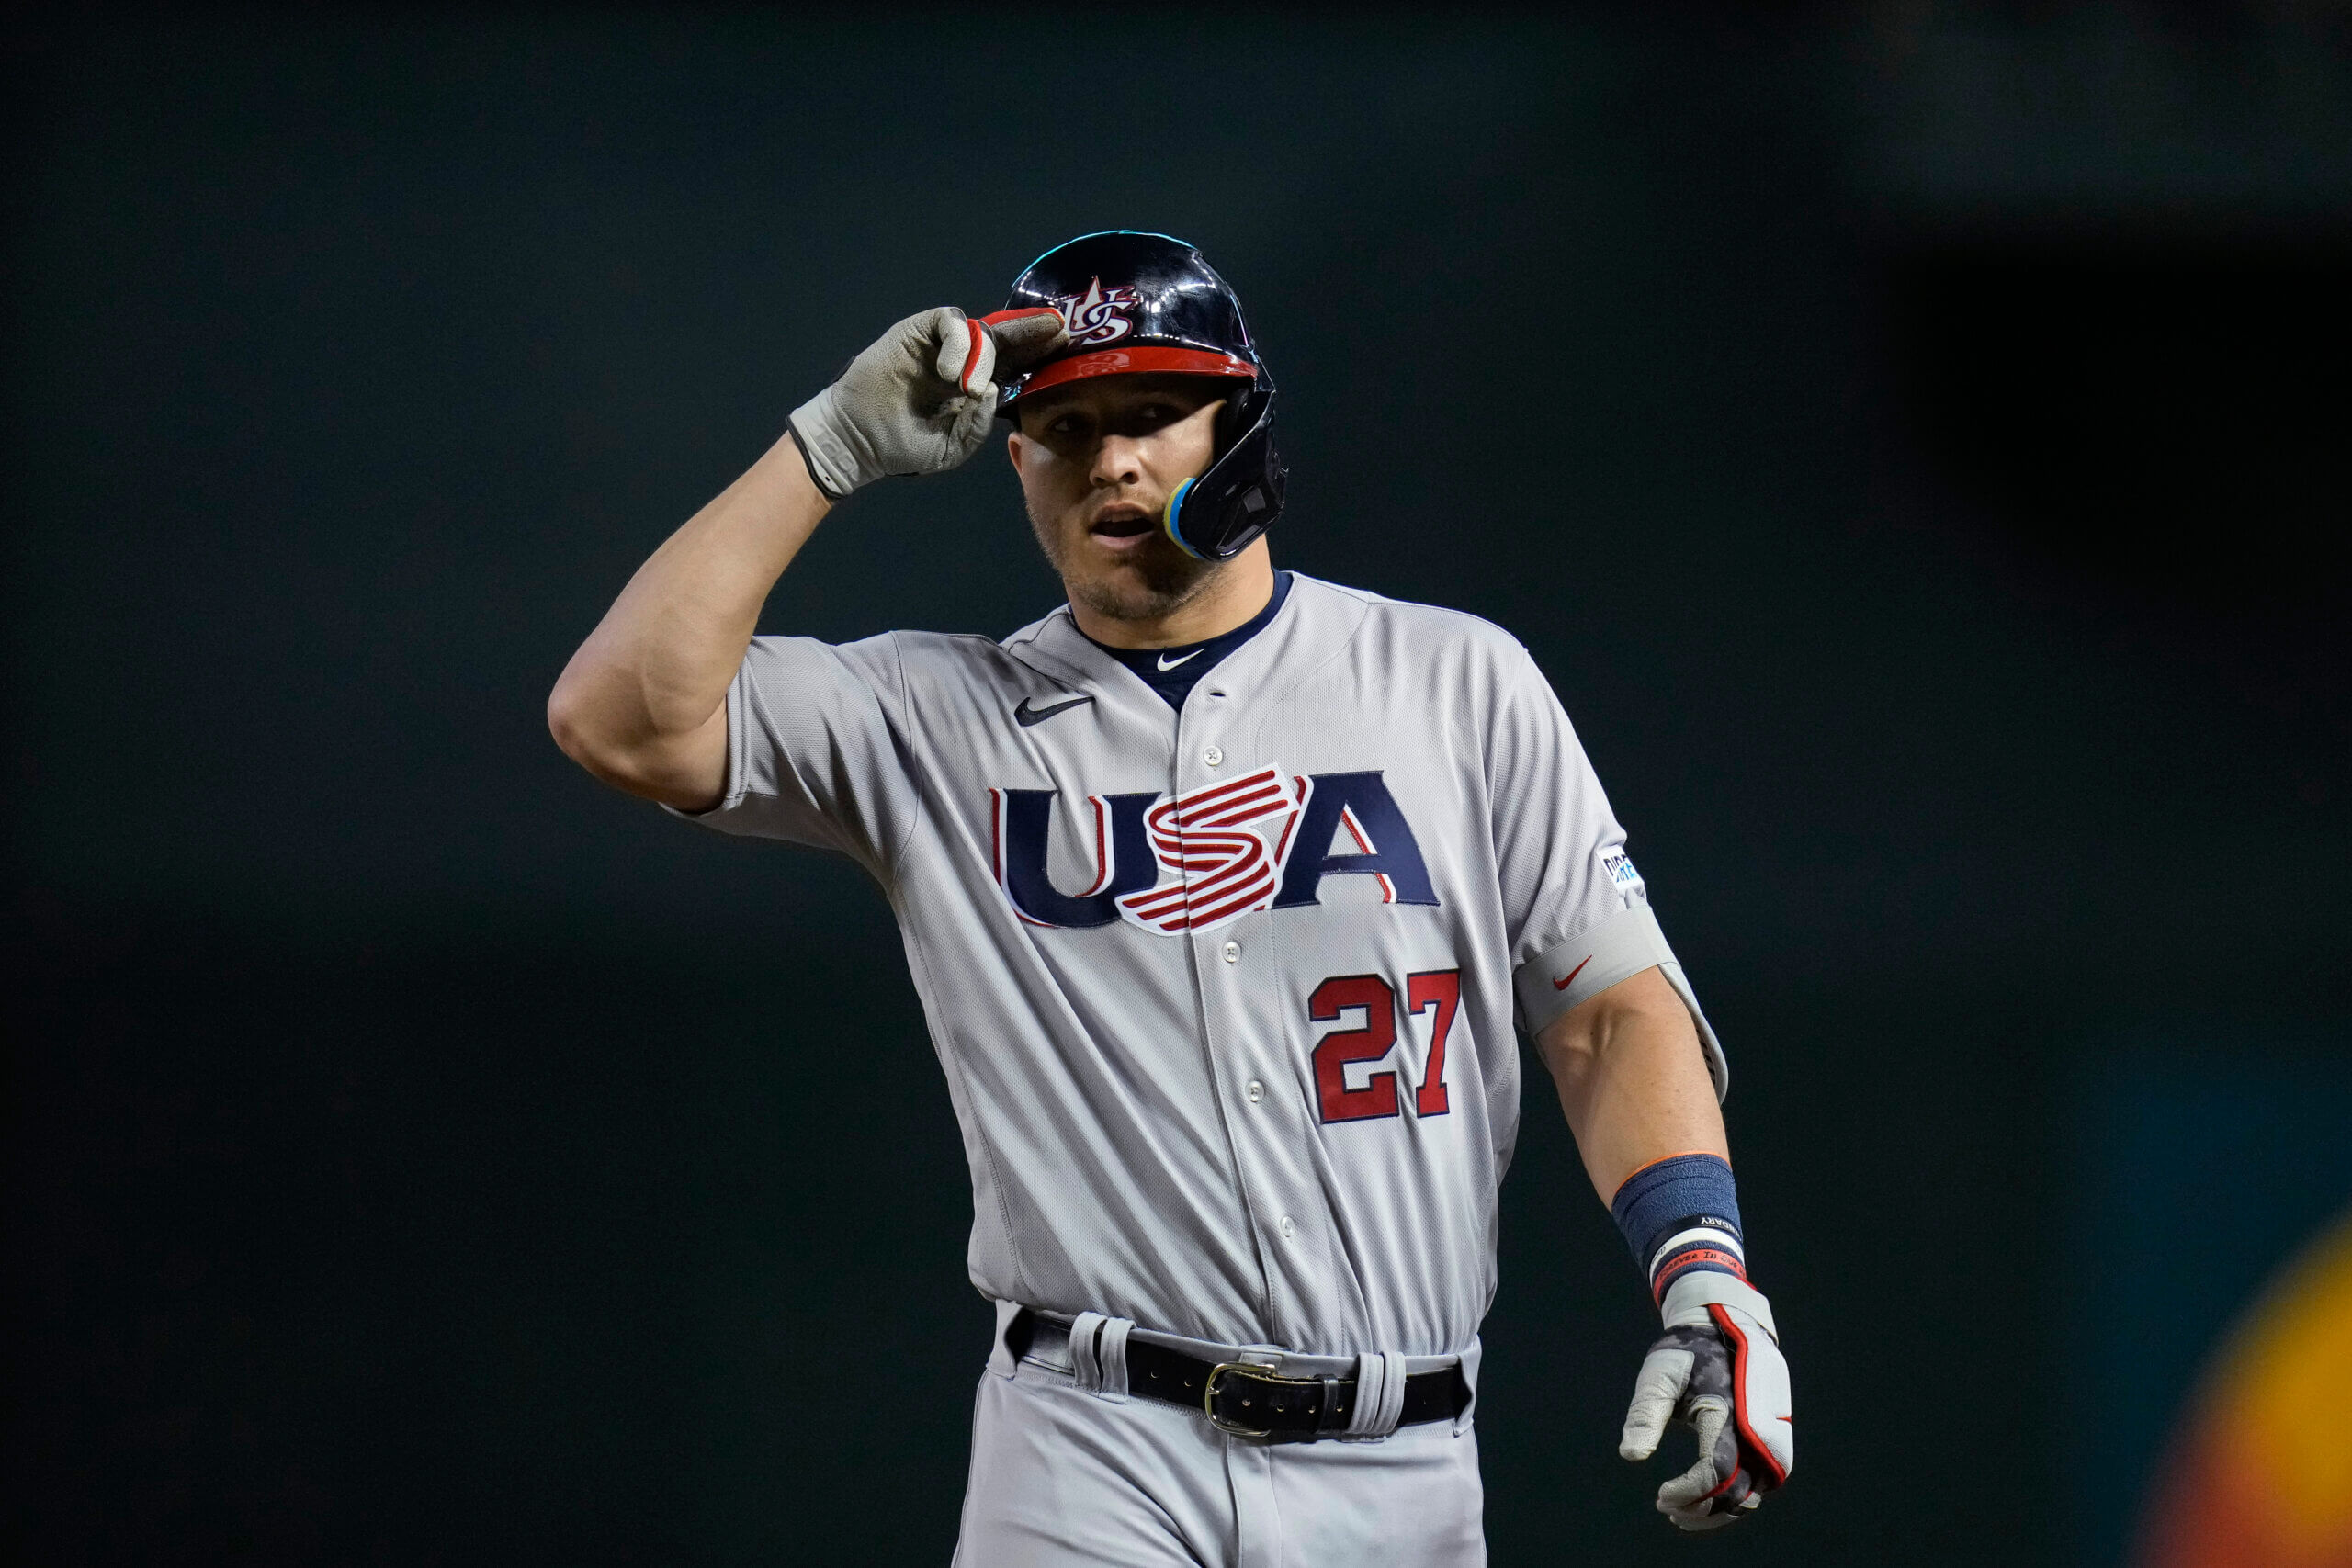 2023 World Baseball Classic: USA team roster  Arenado, Turner, Trout,  Betts, Kelly - AS USA